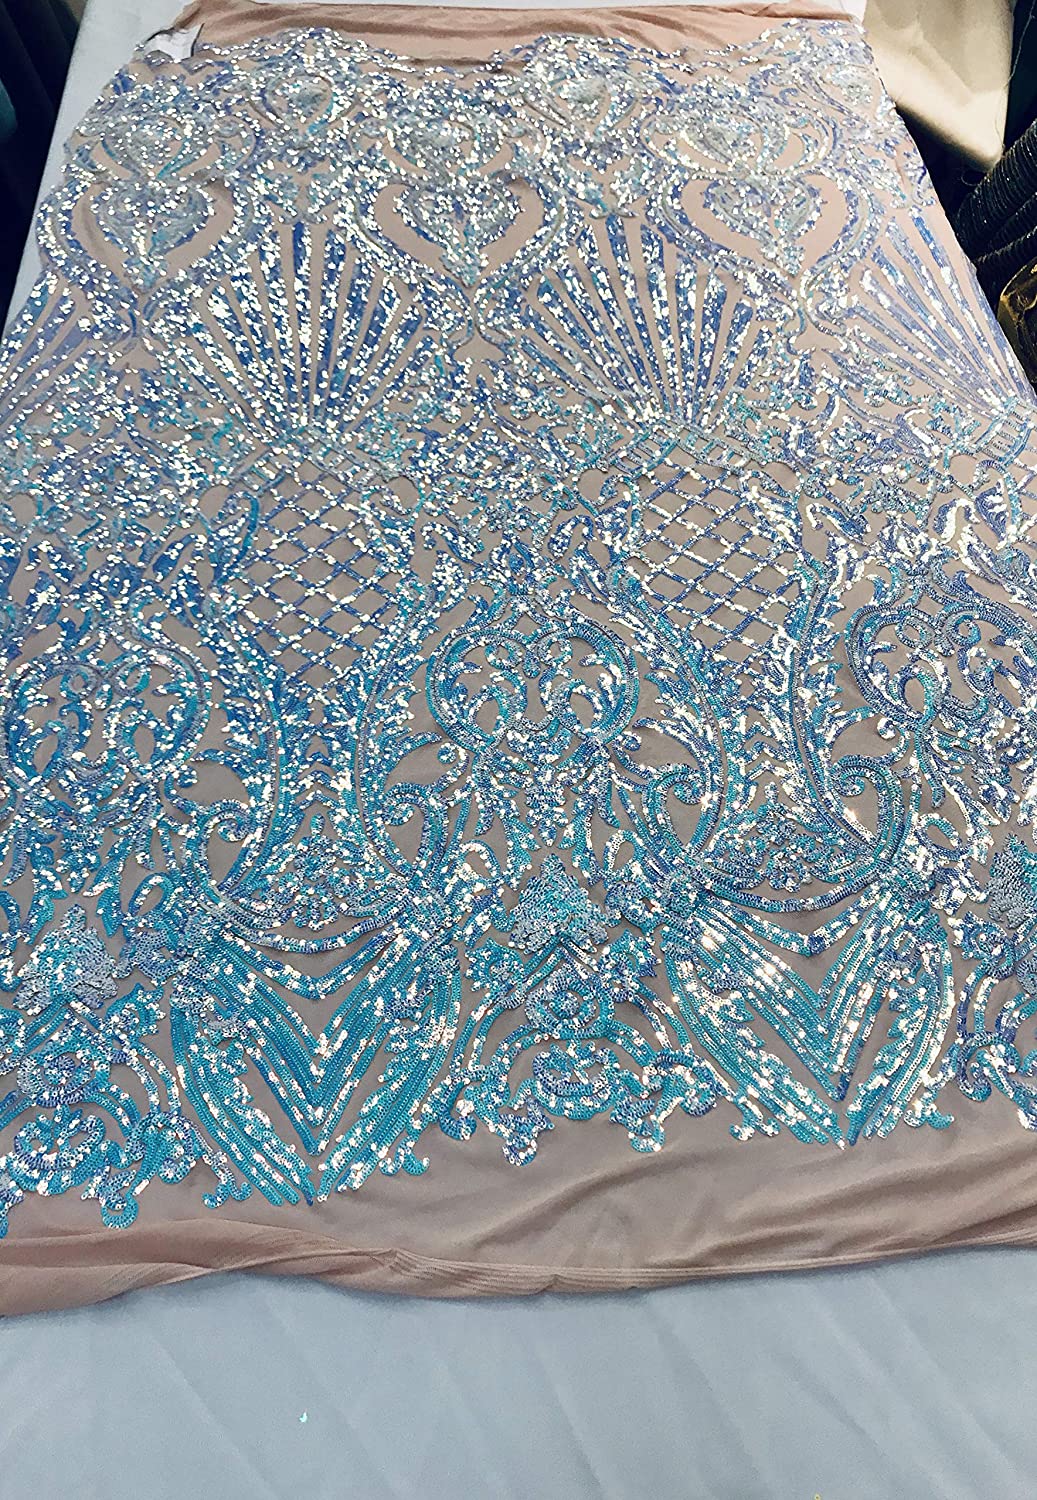 Damask Sequins Design on a 4 Way Stretch Mesh Fabric - for Night Gowns - Prom Dresses - (Aqua Iridescent on Nude, 1 Yard)